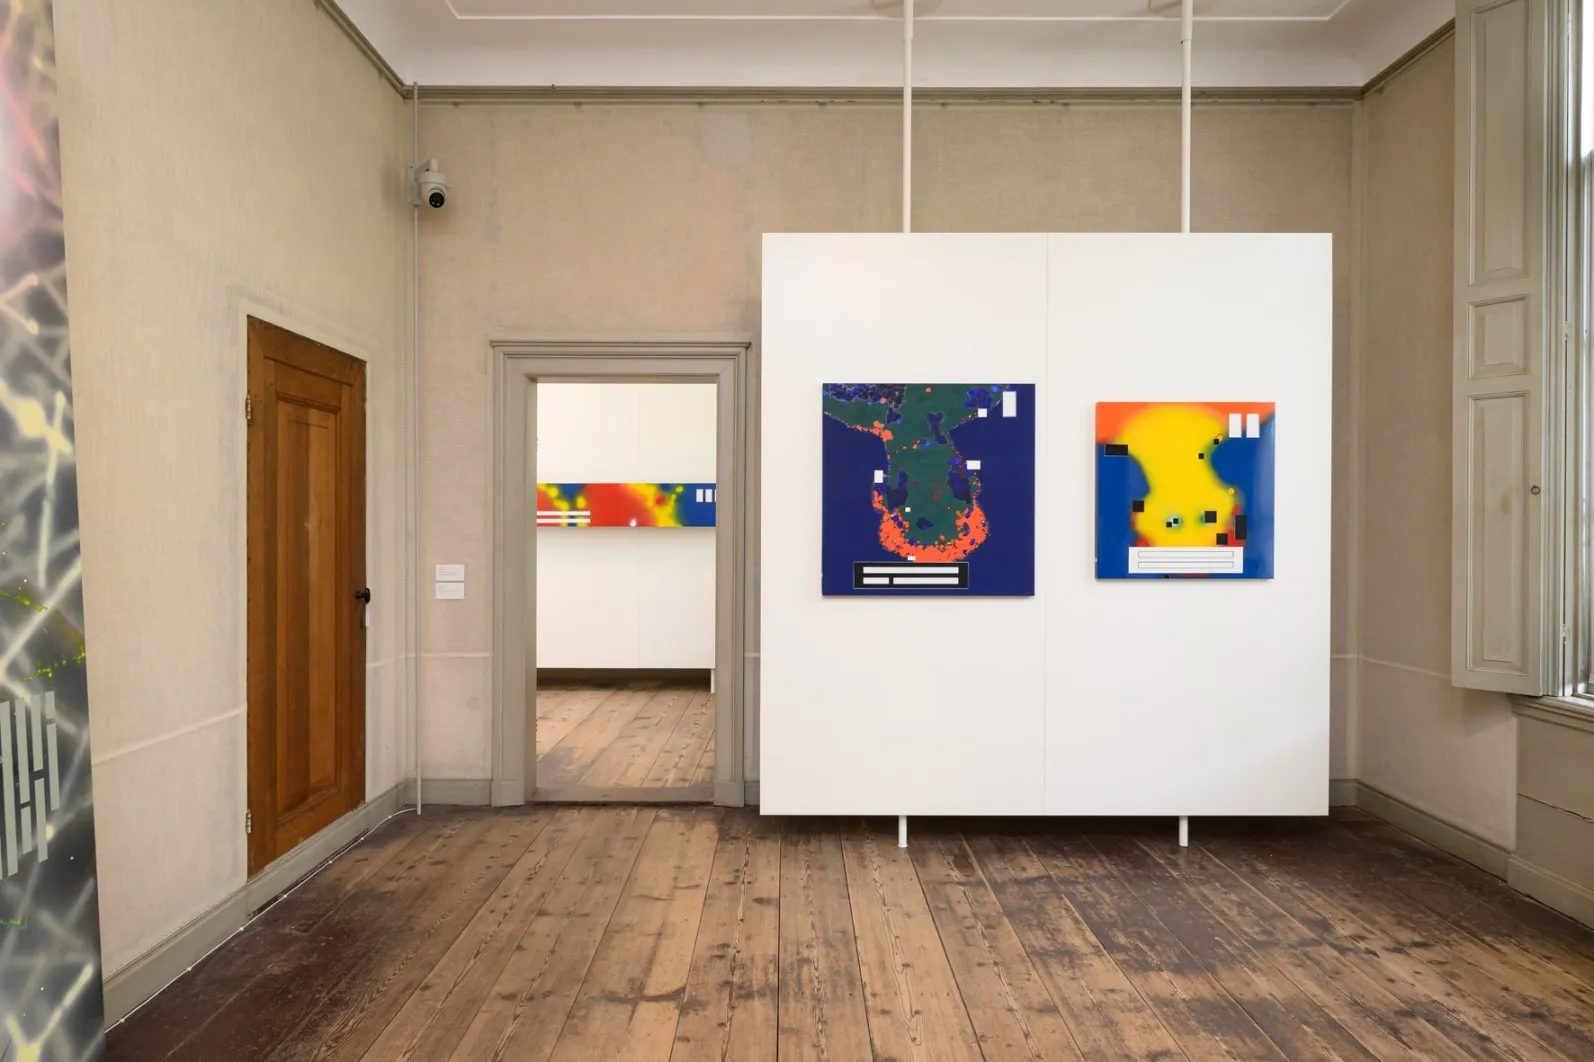 Two artworks that evoke the appearance of thermal images in the exhibition space